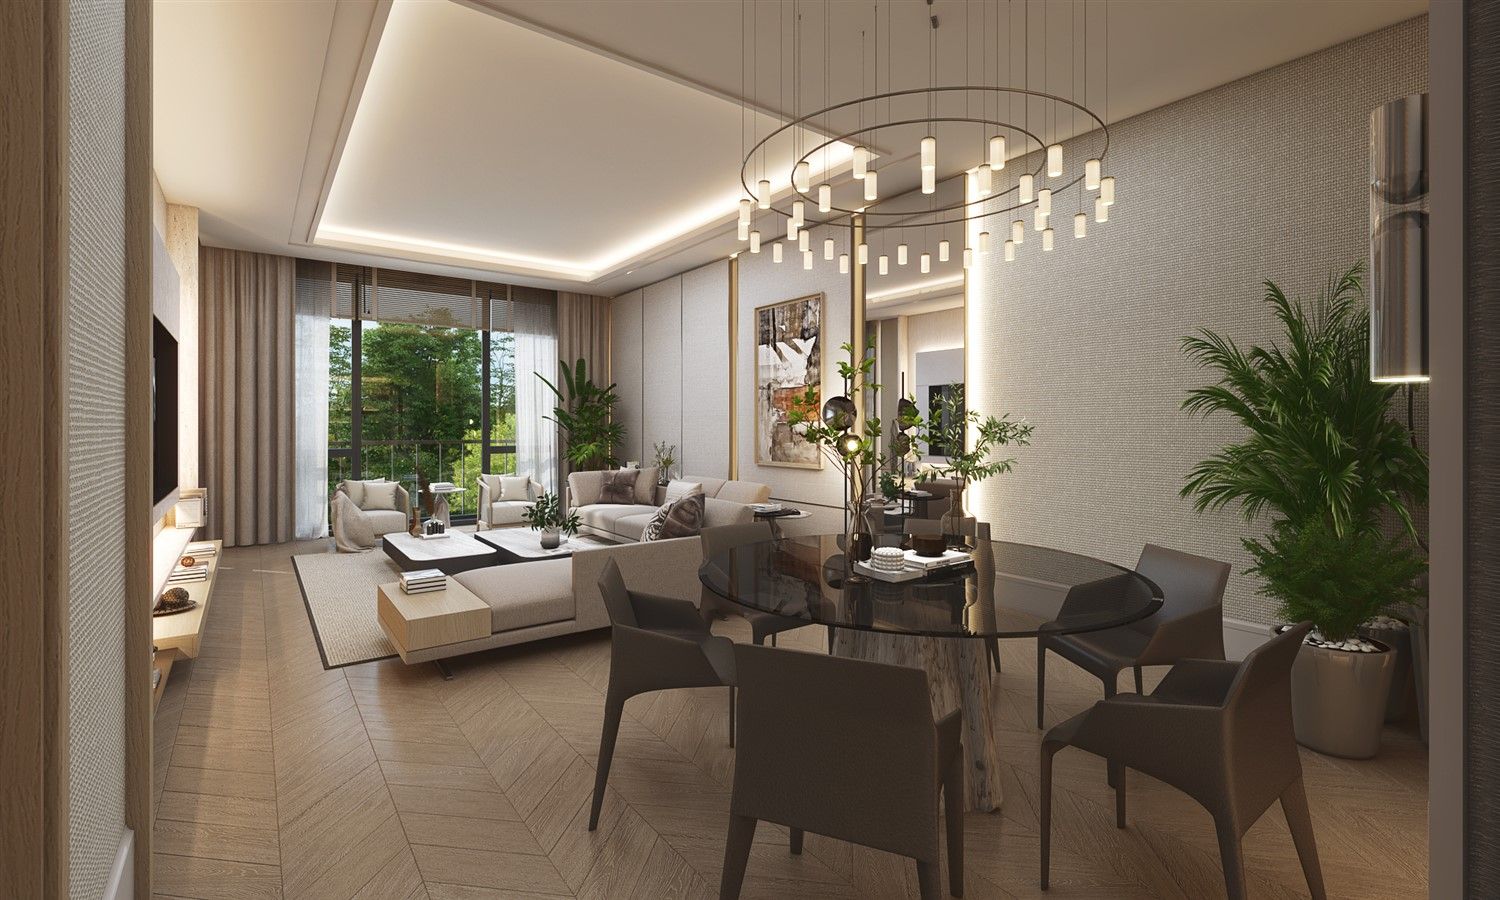 Elite large-scale residential complex with five-star hotel concept - Istanbul